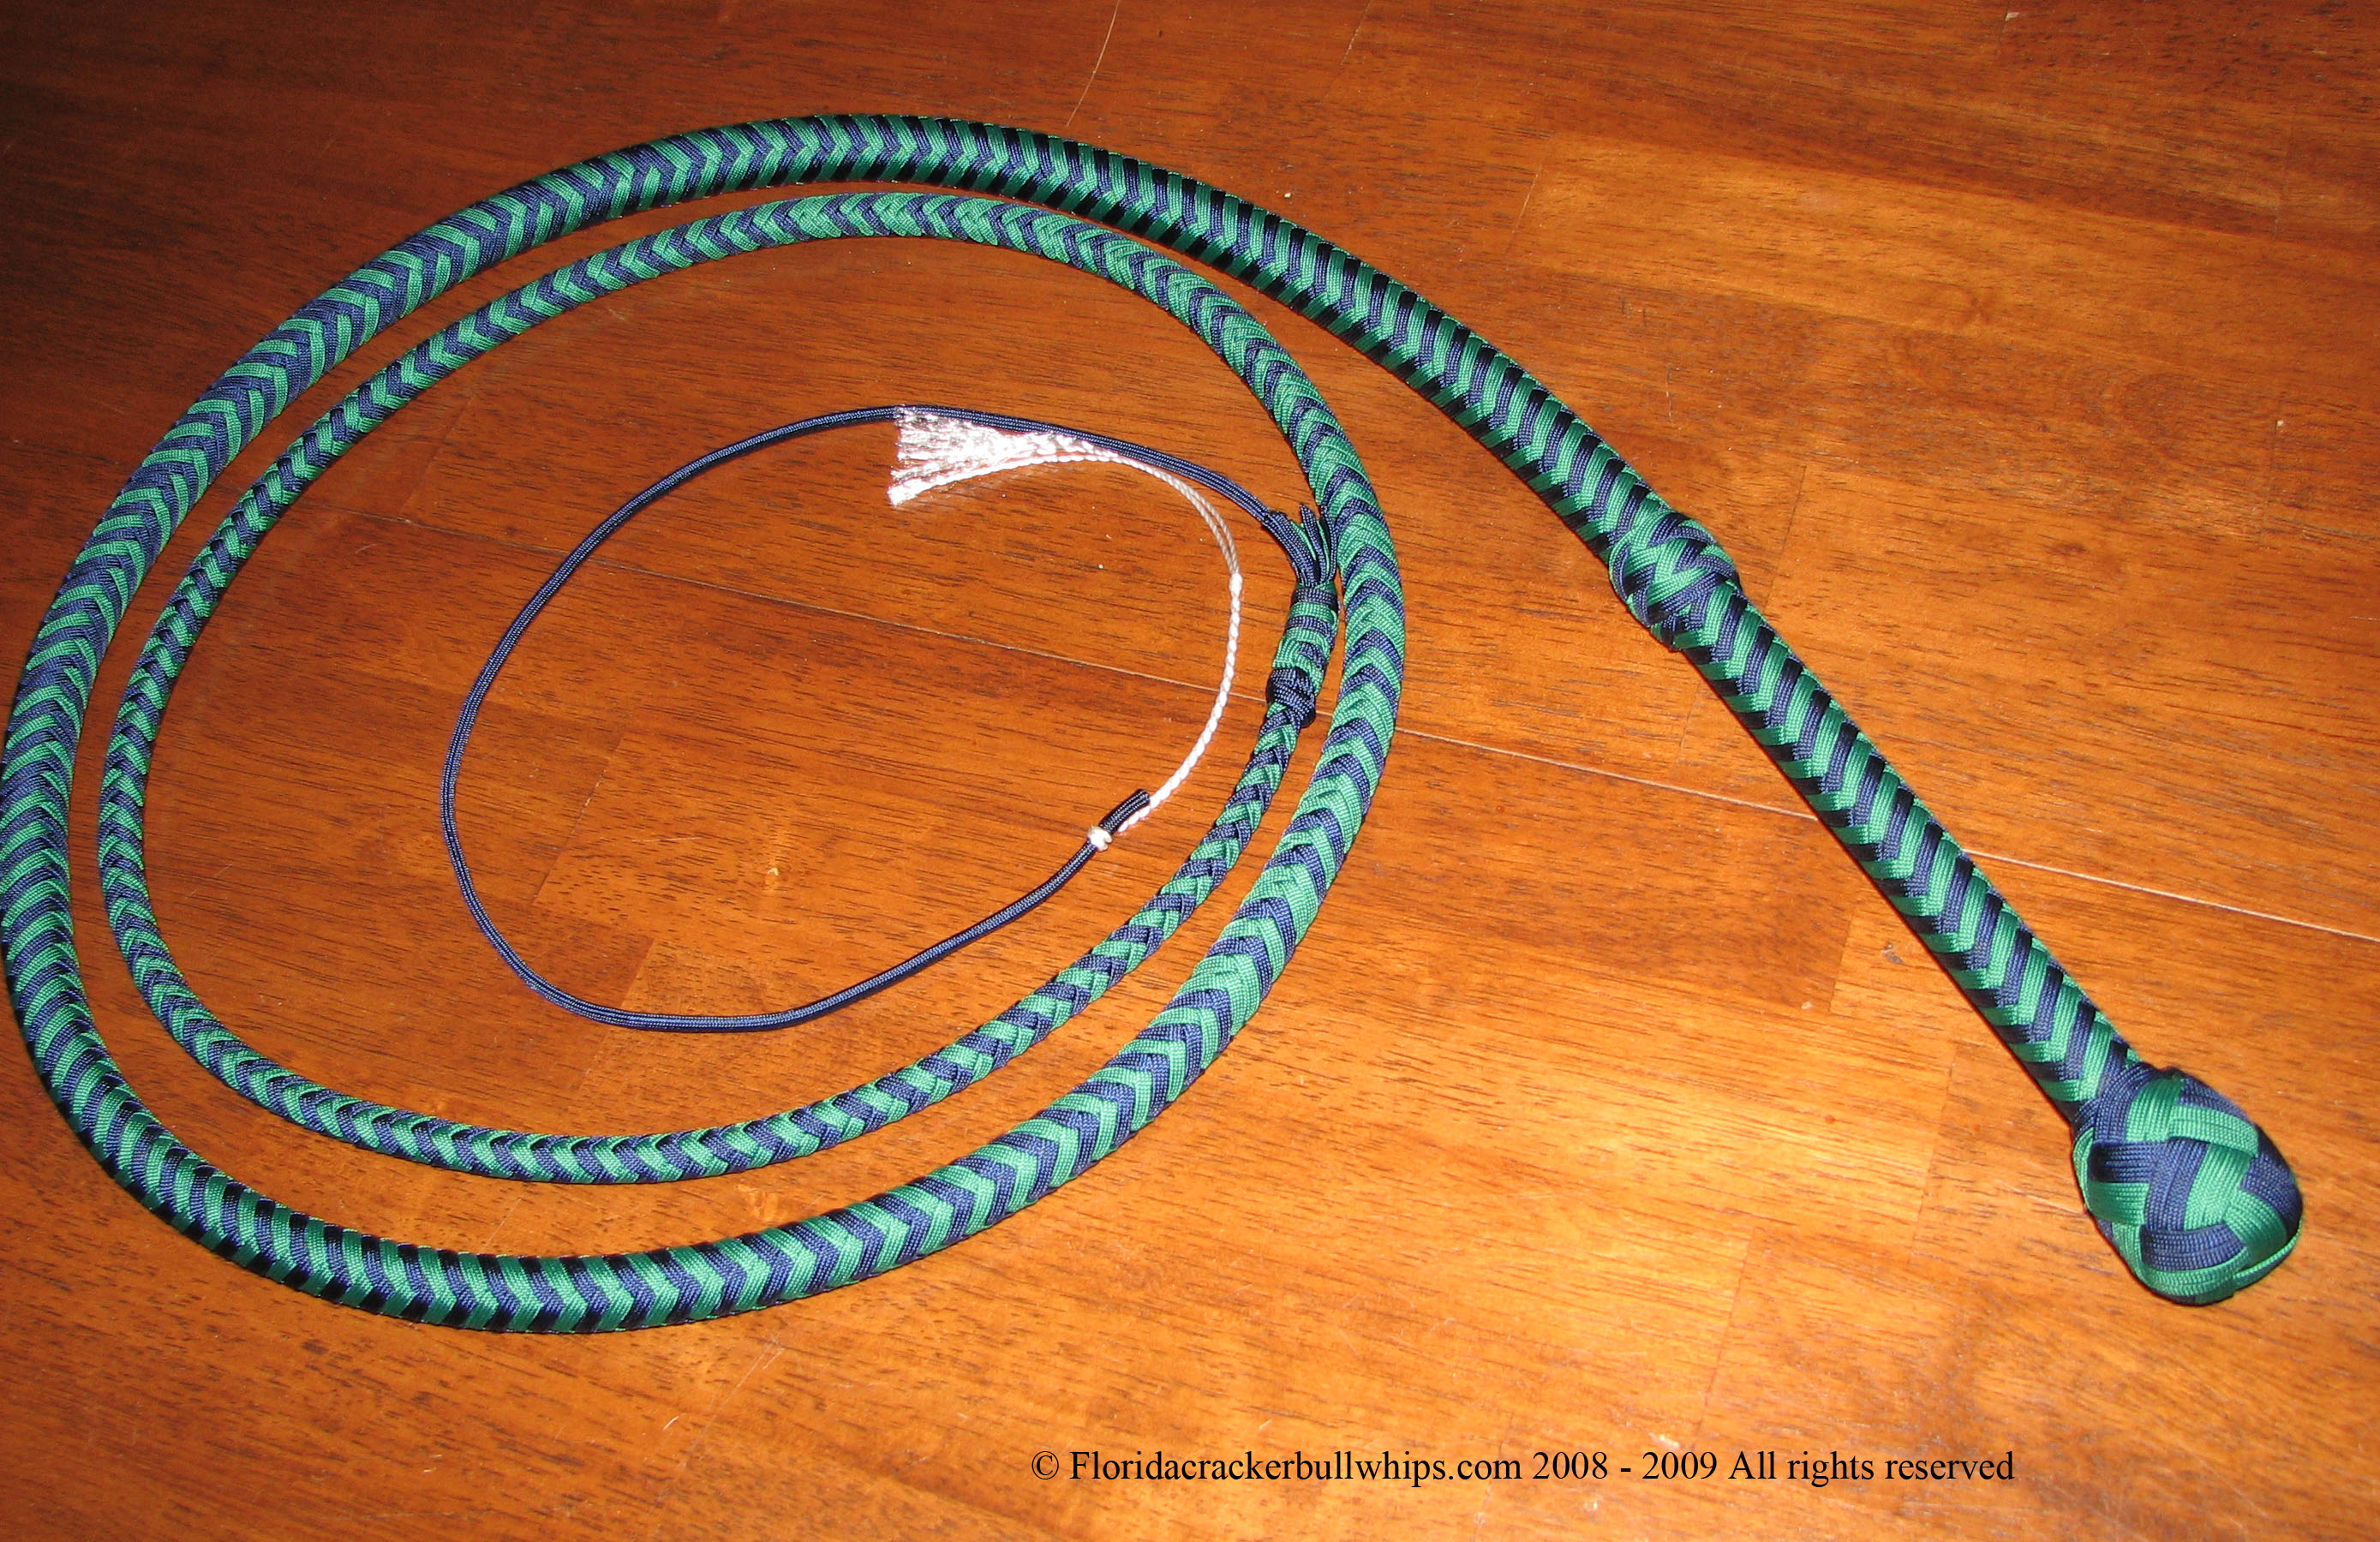 16 Plait nylon bullwhip in V-pattern colors forest green and black.